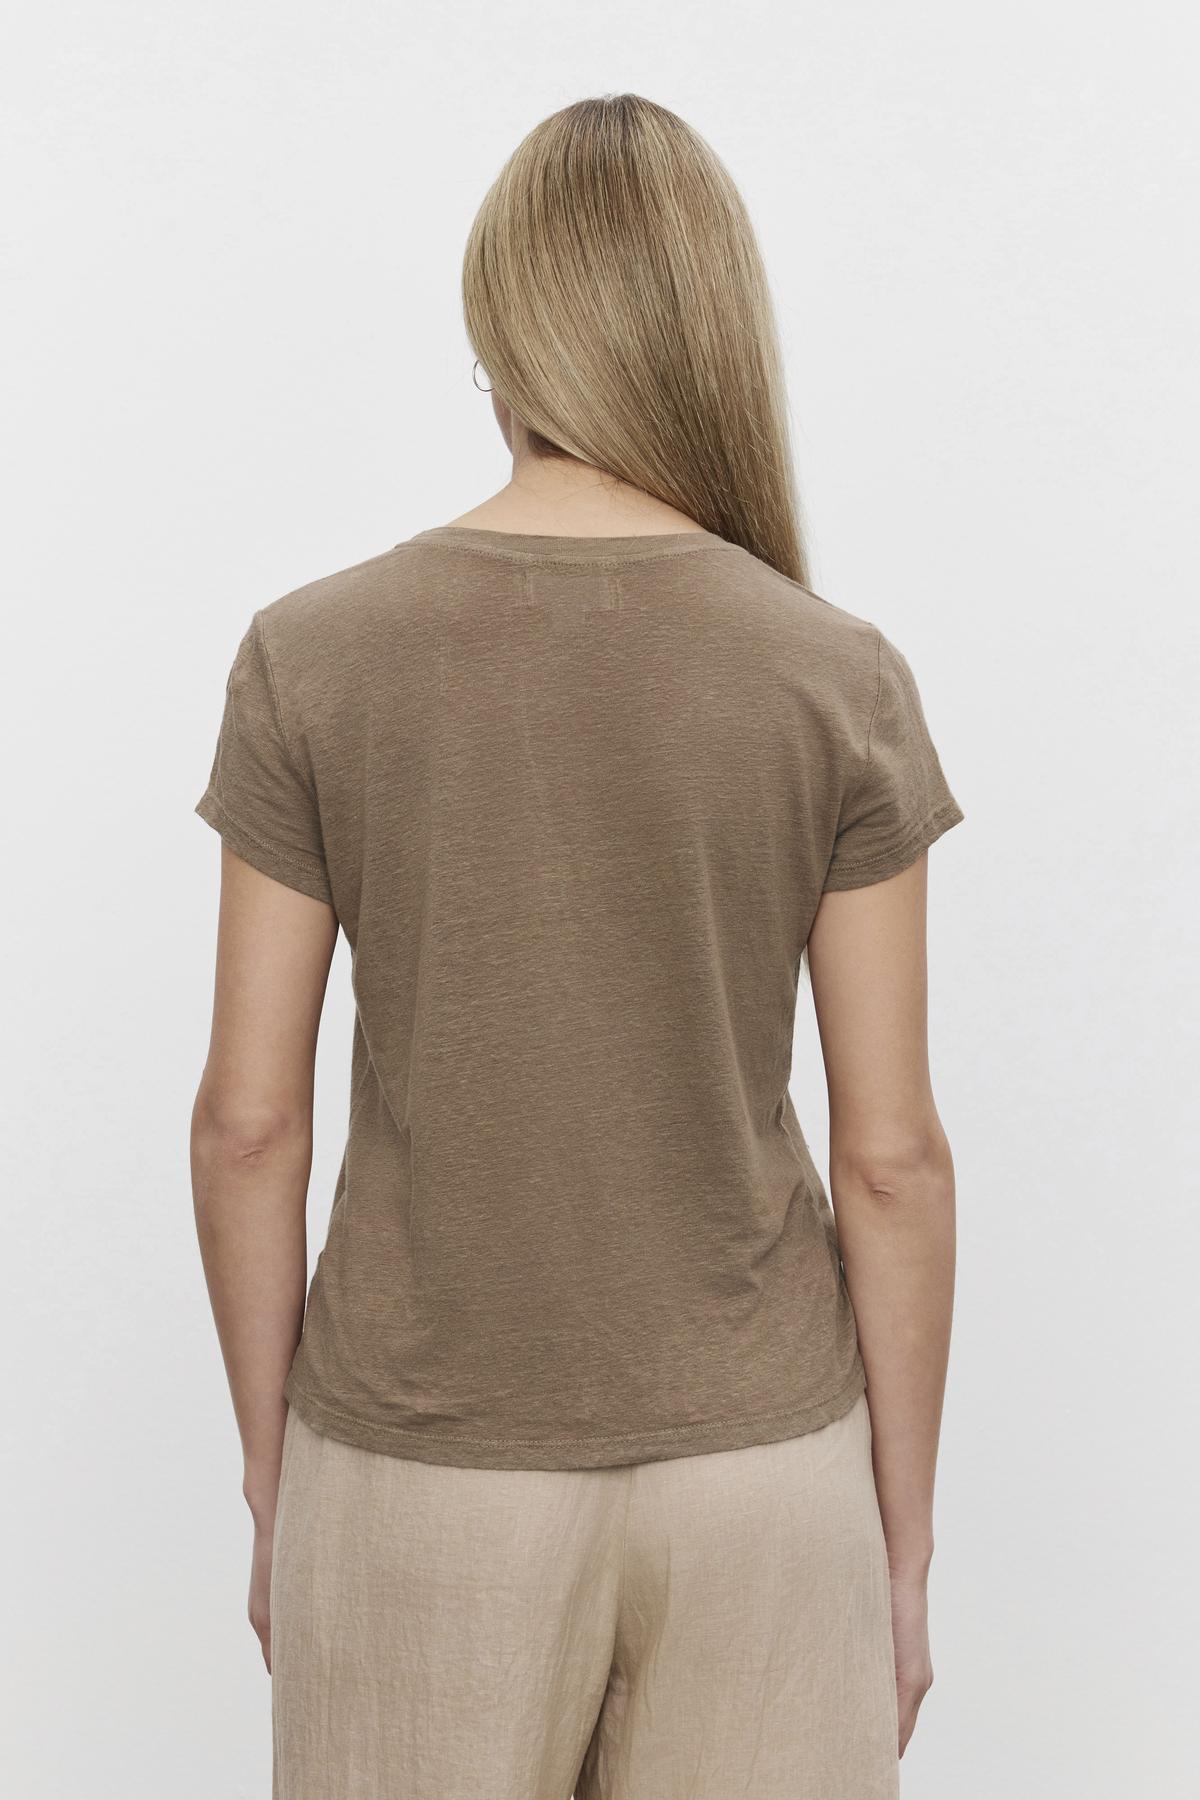   A woman seen from behind, wearing a Velvet by Graham & Spencer CASEY LINEN KNIT CREW NECK TEE with a hi-lo hemline and beige pants. 